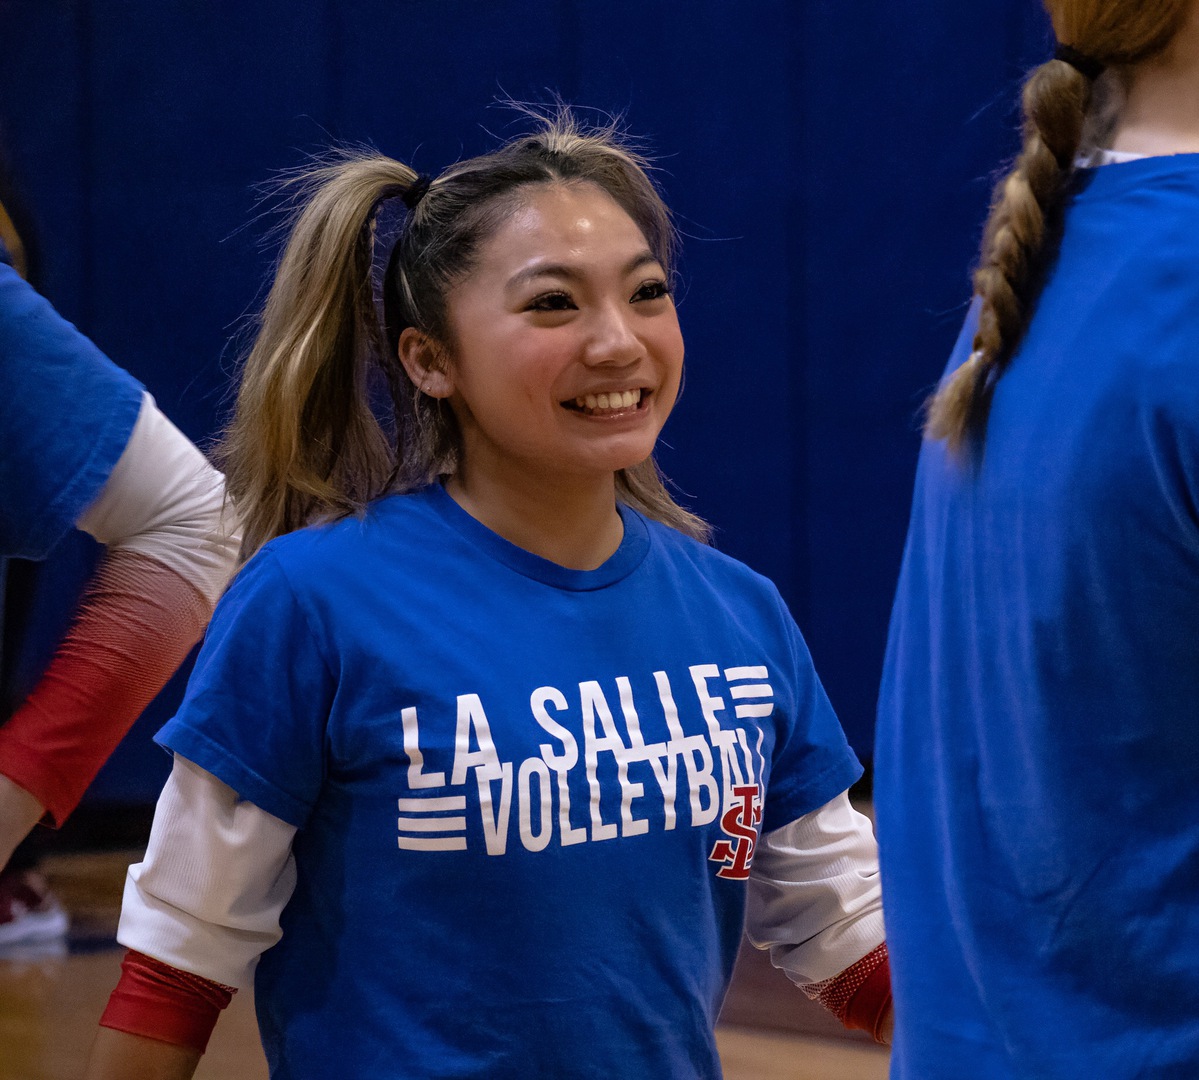 Grace+Vu+began+playing+volleyball+at+a+young+age+and+is+looking+forward+to+finishing+her+final+year+of+playing+volleyball+with+the+Falcons.+